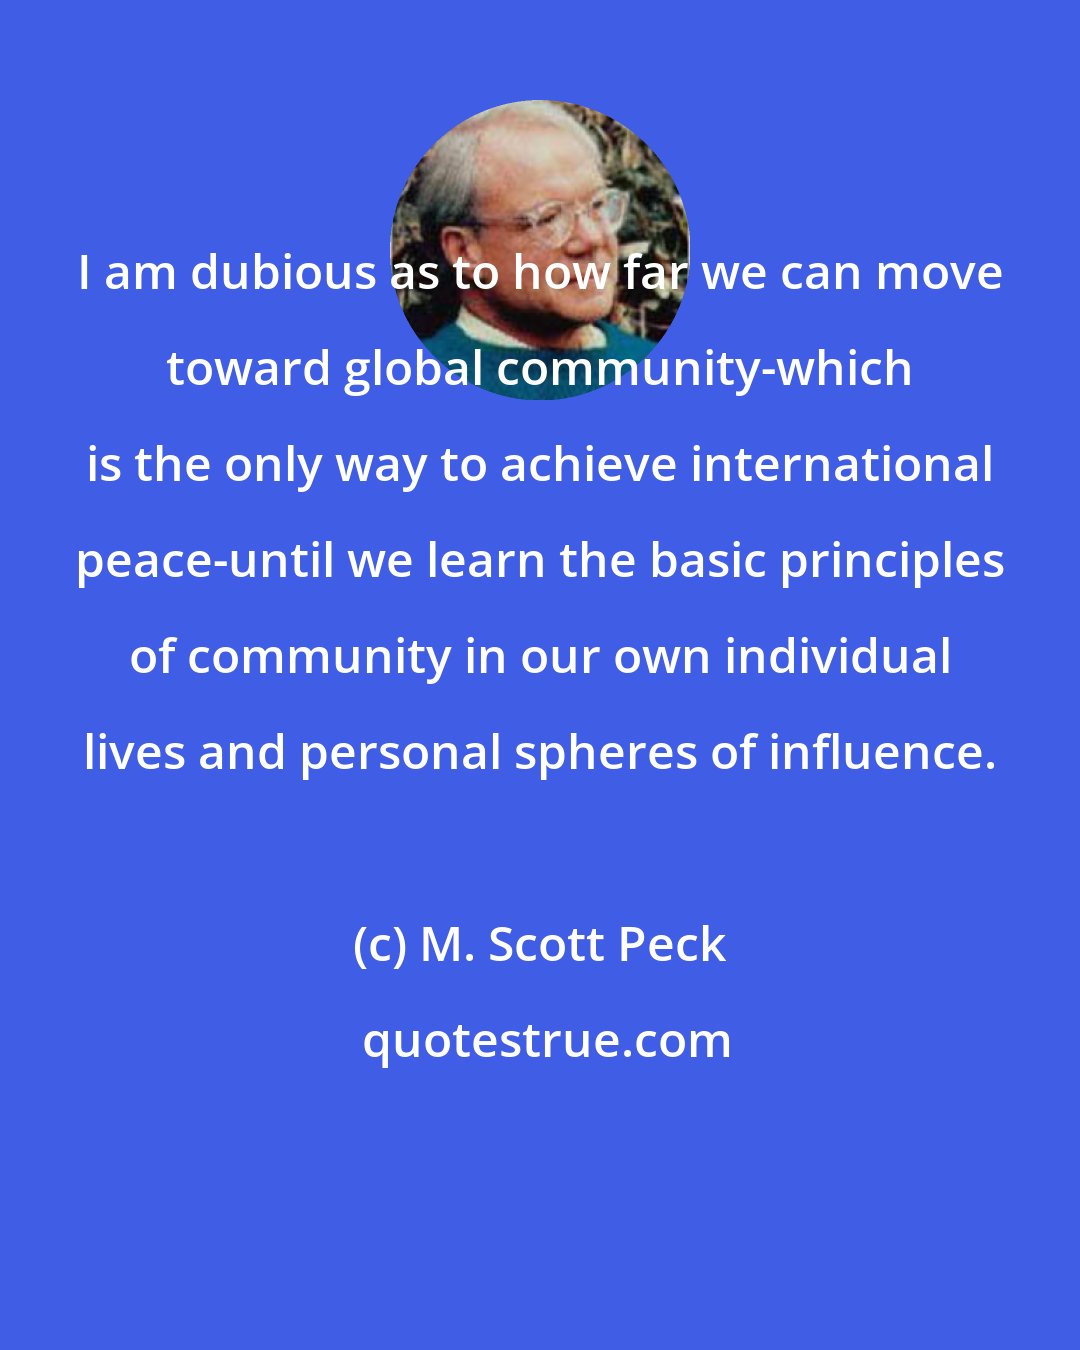 M. Scott Peck: I am dubious as to how far we can move toward global community-which is the only way to achieve international peace-until we learn the basic principles of community in our own individual lives and personal spheres of influence.